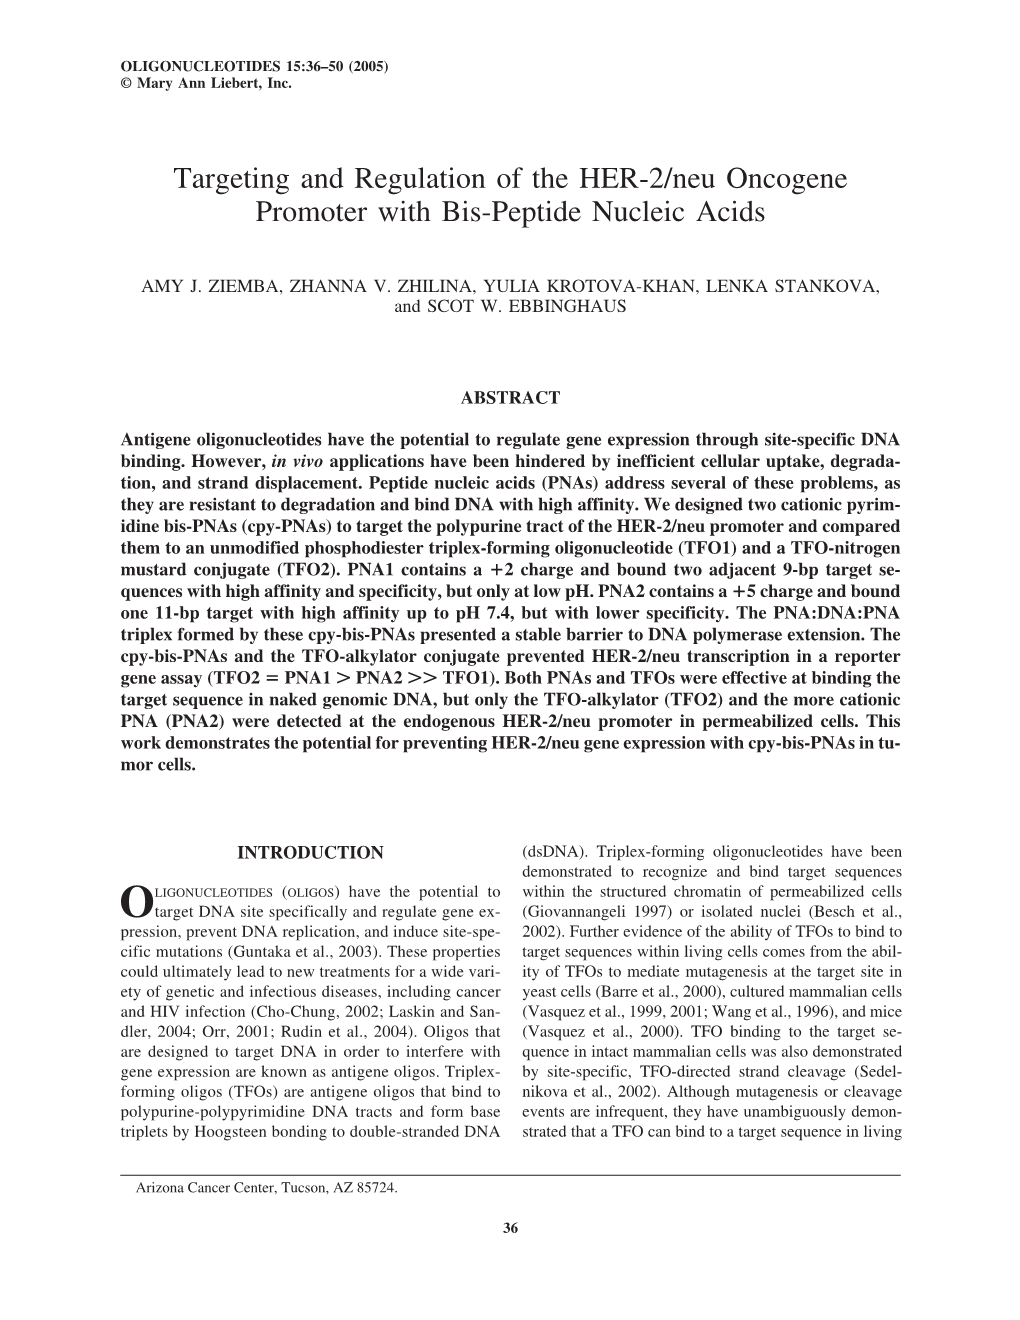 Targeting and Regulation of the HER-2/Neu Oncogene Promoter with Bis-Peptide Nucleic Acids